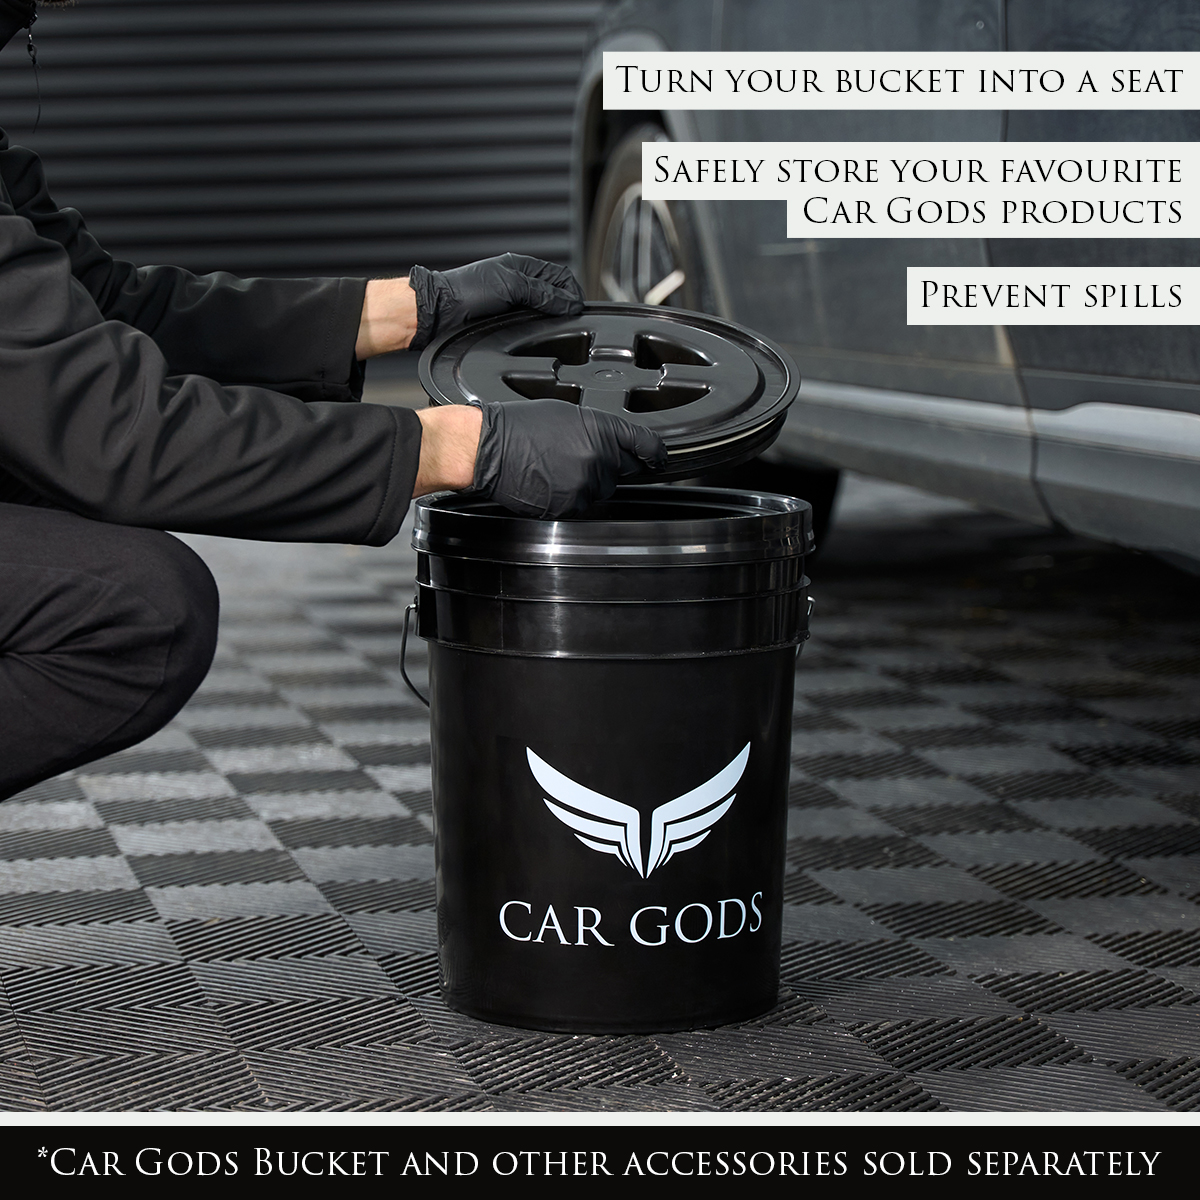 Image shows Bucket Lid being placed onto Car Gods Bucket. Text: turn your bucket into a seat. Safely store your favourite Car Gods products. Prevent spills.